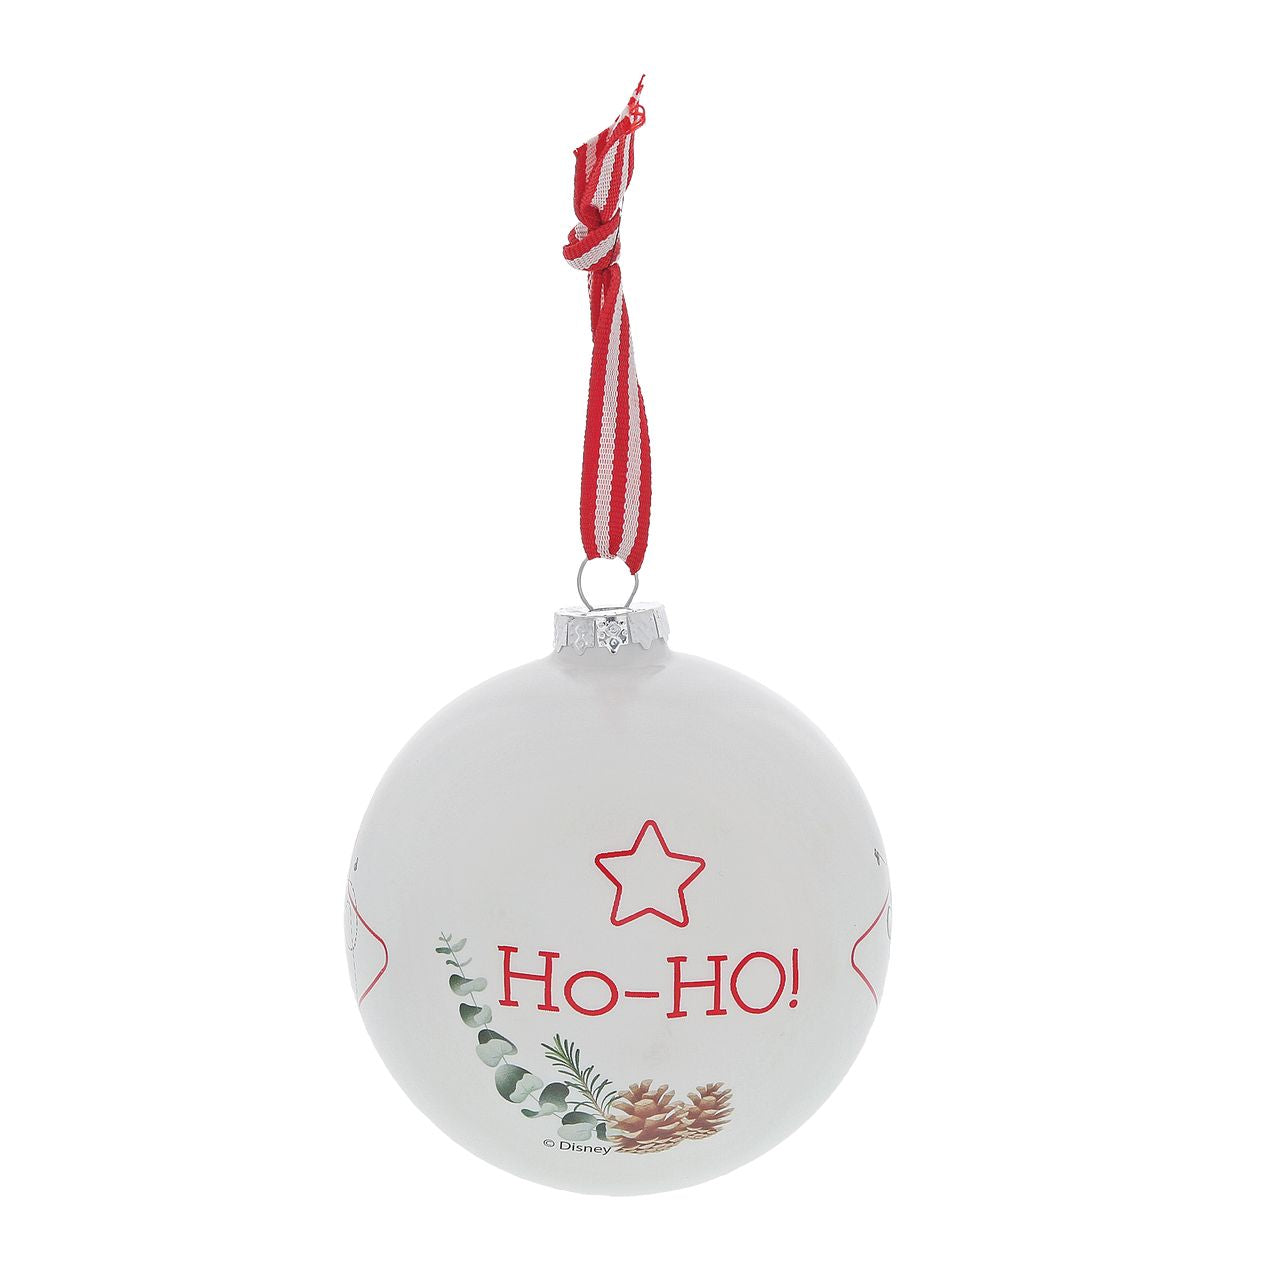 Christmas Bauble Disney Winnie The Pooh  Winnie the Pooh dreams about honey all day and this cute design shows that it is no exception at Christmas time. Sometimes the smallest things take up the most room in your heart and this glass bauble is the perfect example.